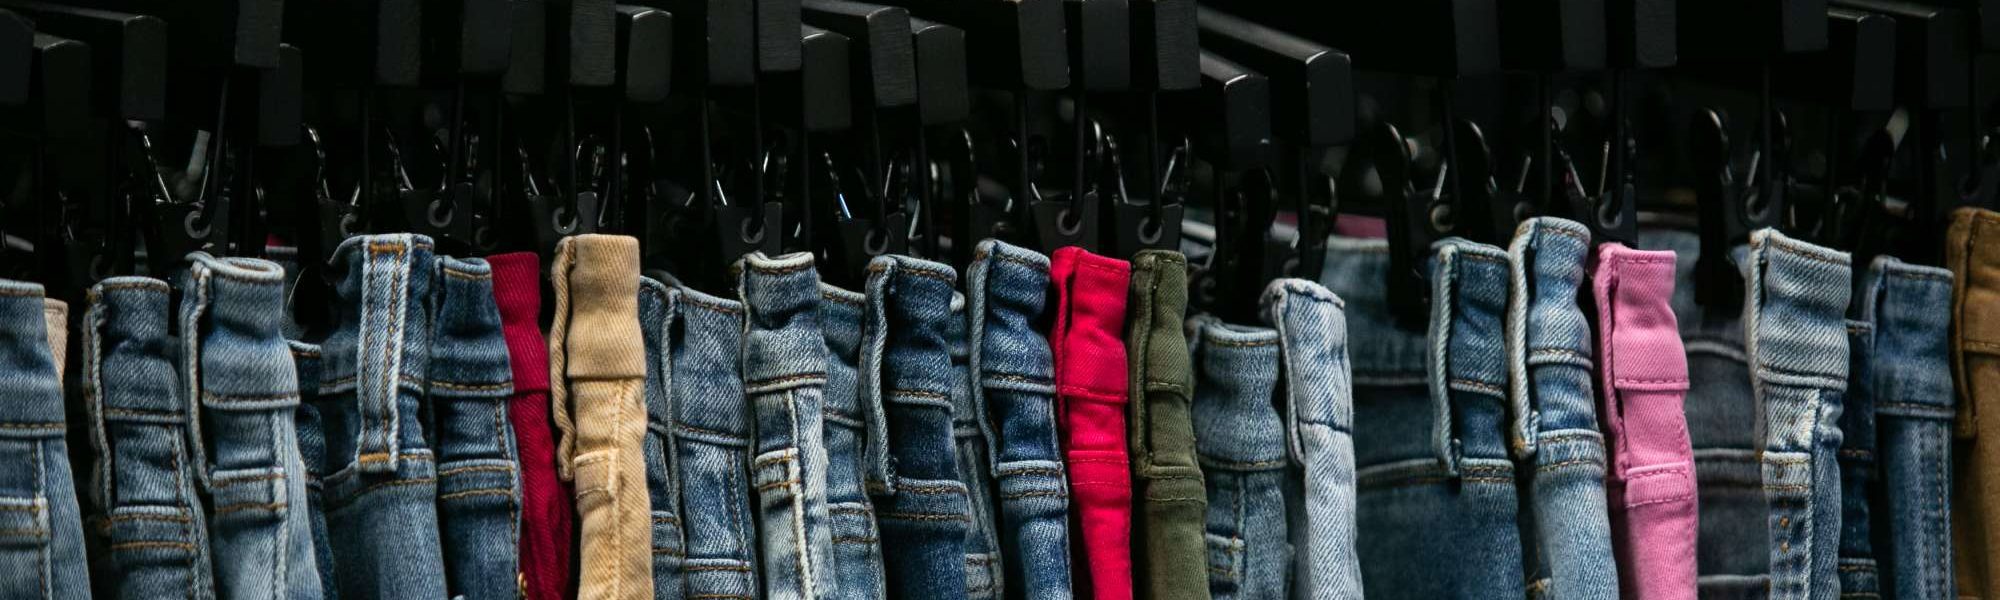 New England Apparel Show - Jeans on a rack